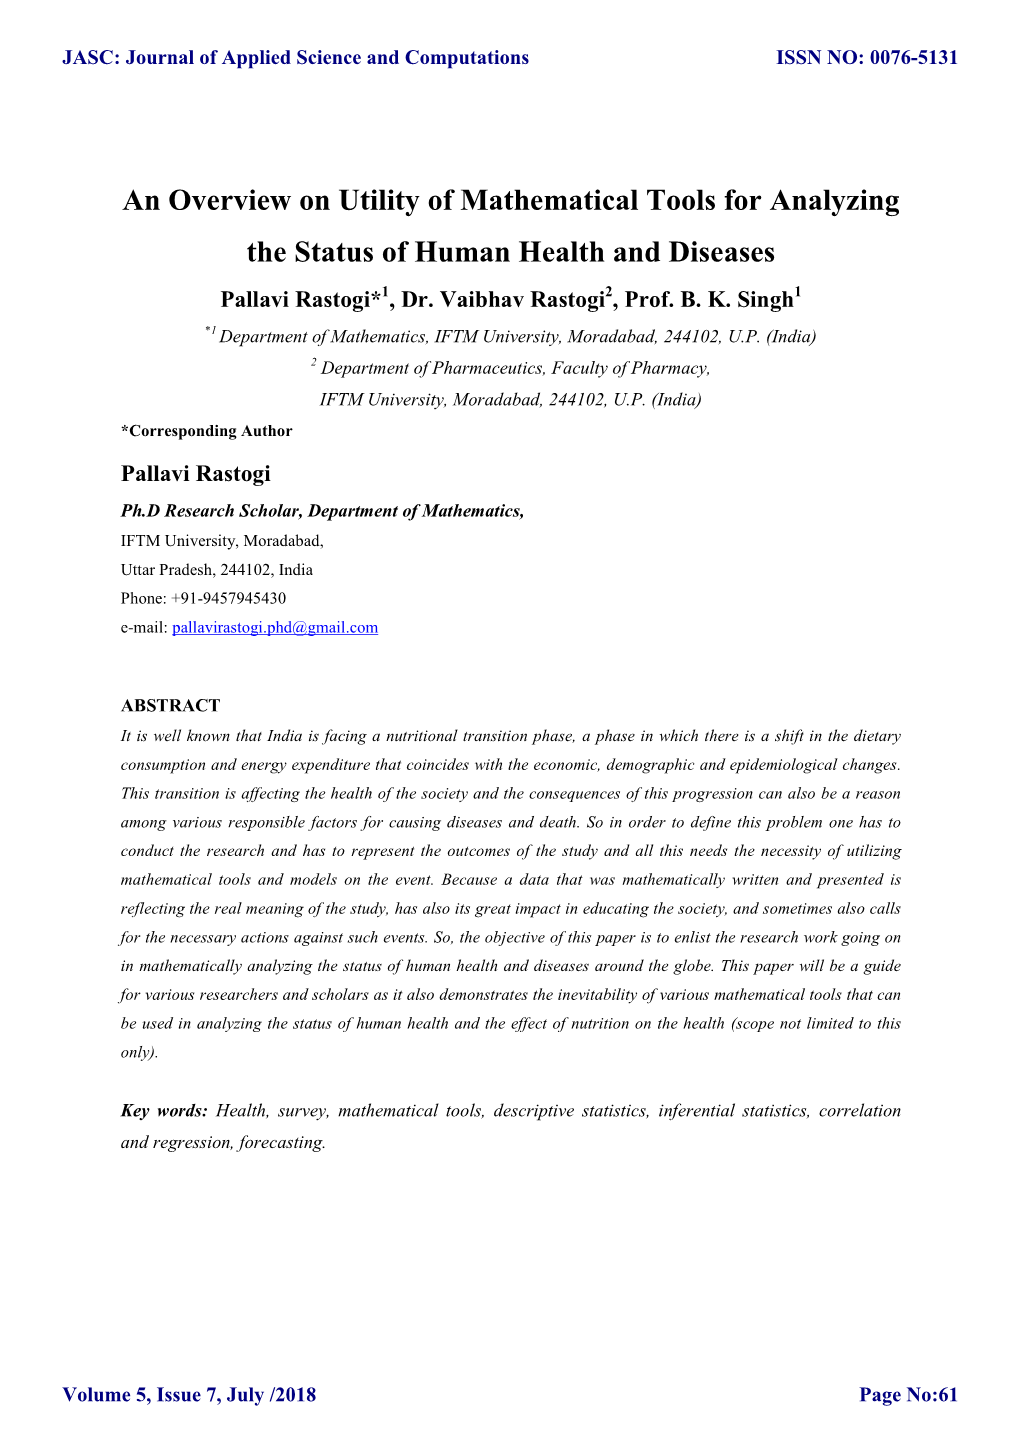 An Overview on Utility of Mathematical Tools for Analyzing the Status of Human Health and Diseases Pallavi Rastogi*1, Dr